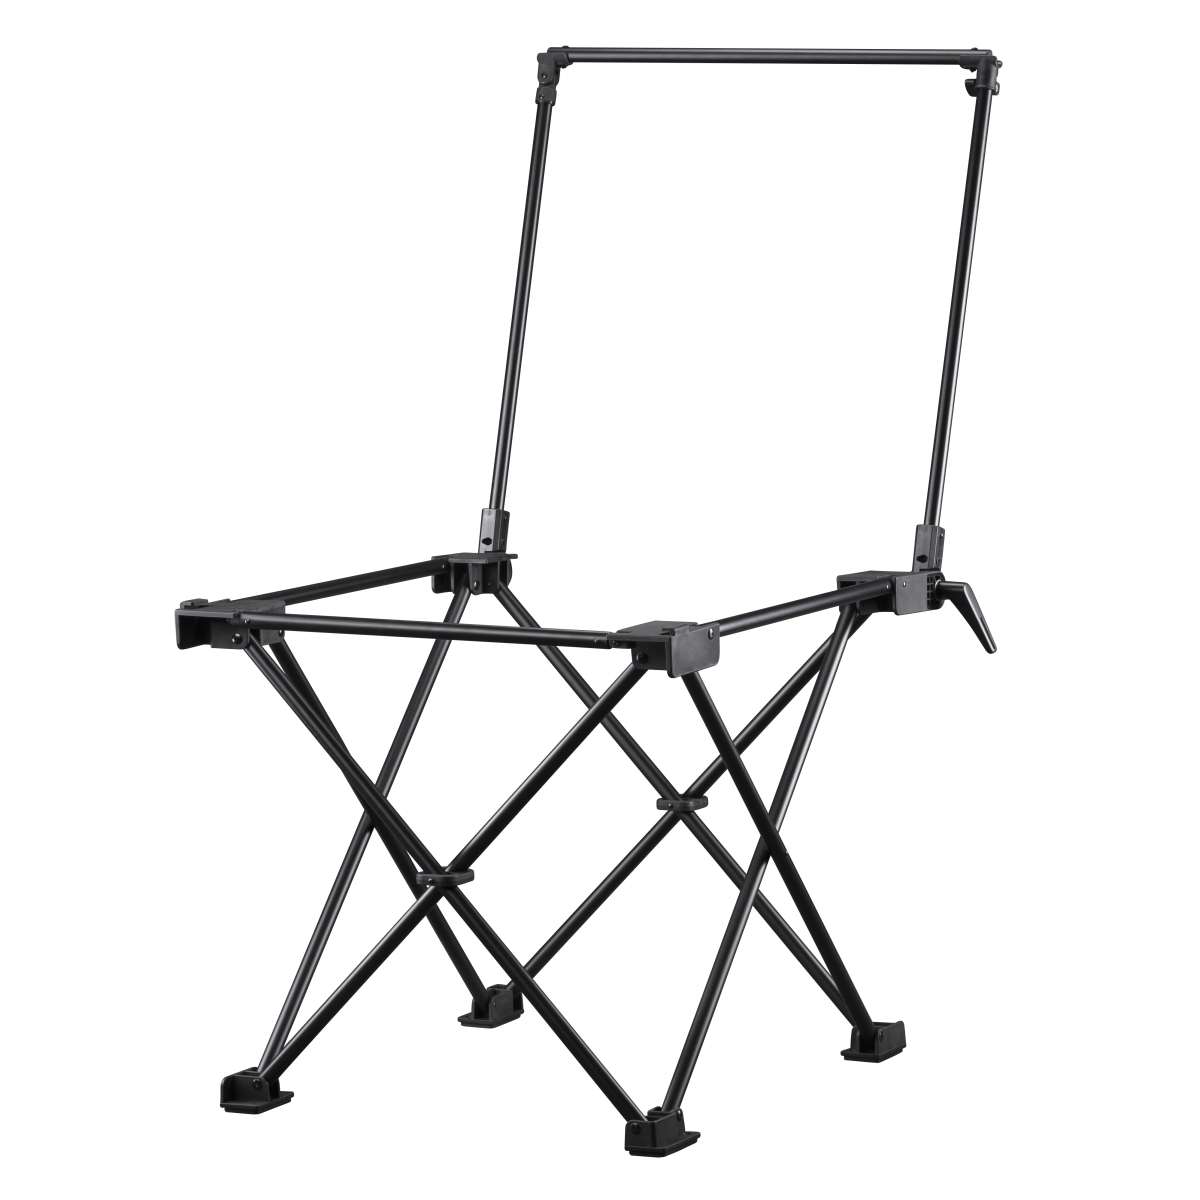 Walimex pro foldable table 60x130 cm